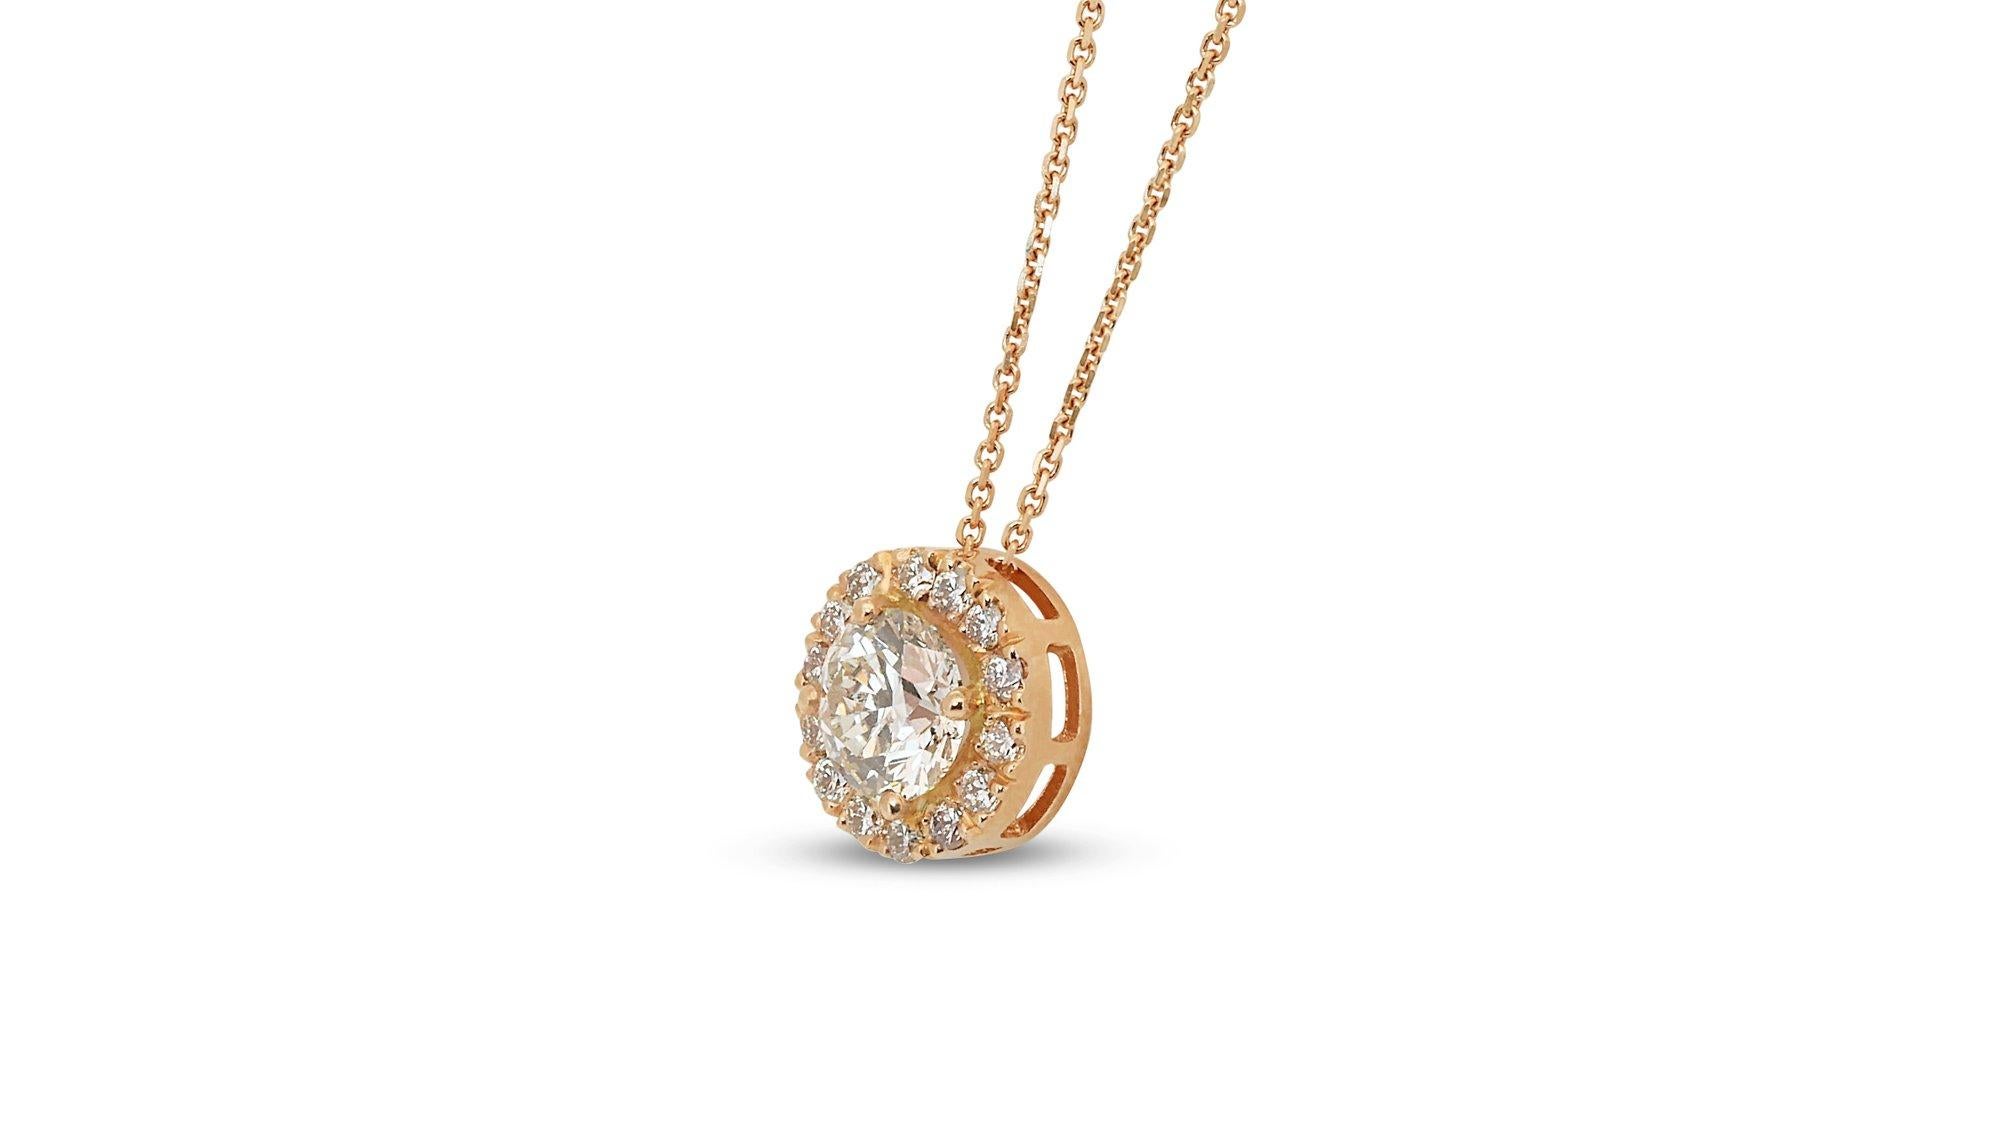 Introducing our stunning 18K Yellow Gold Halo Diamond Pendant - 1.15ct , adorned with a resplendent 1.00 carat Brilliant-cut diamond at its center. Crafted with meticulous attention to detail, this pendant is as lightweight as it is luxurious,